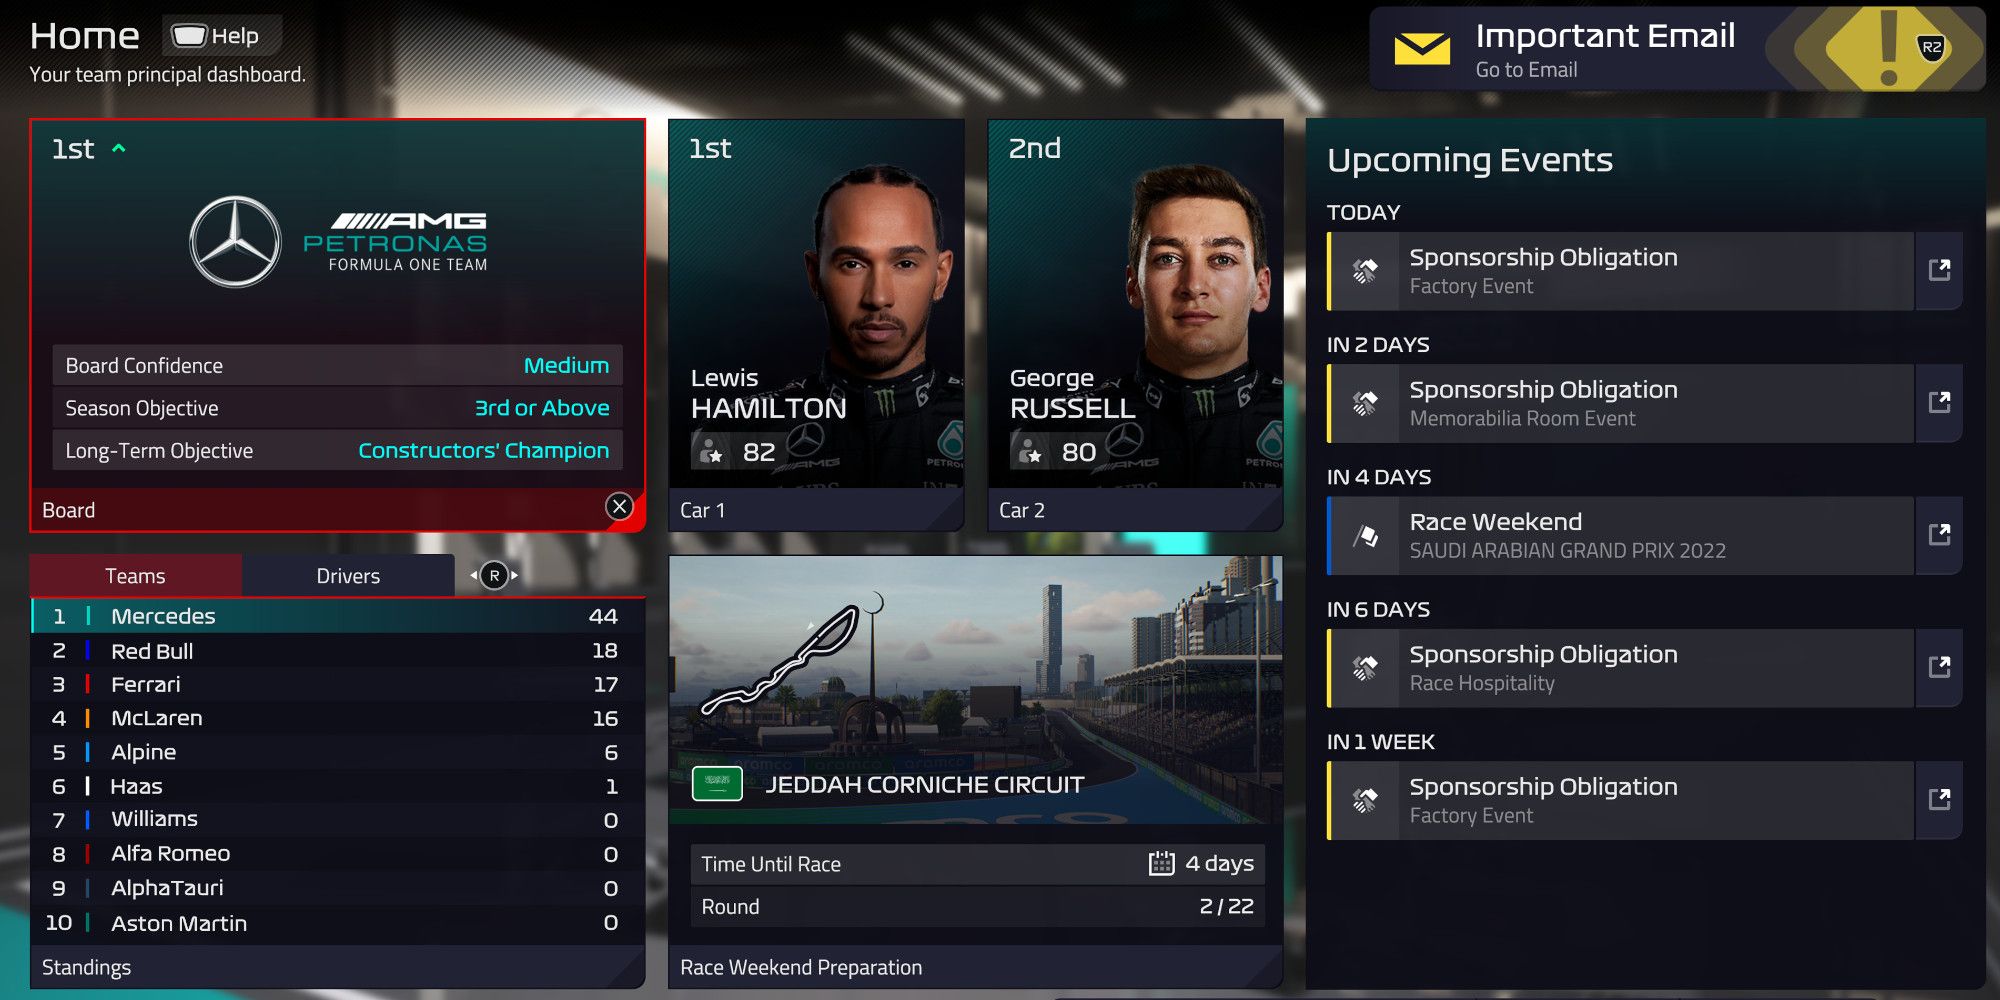 f1 manager 2022 driver screen showing hamilton and russel